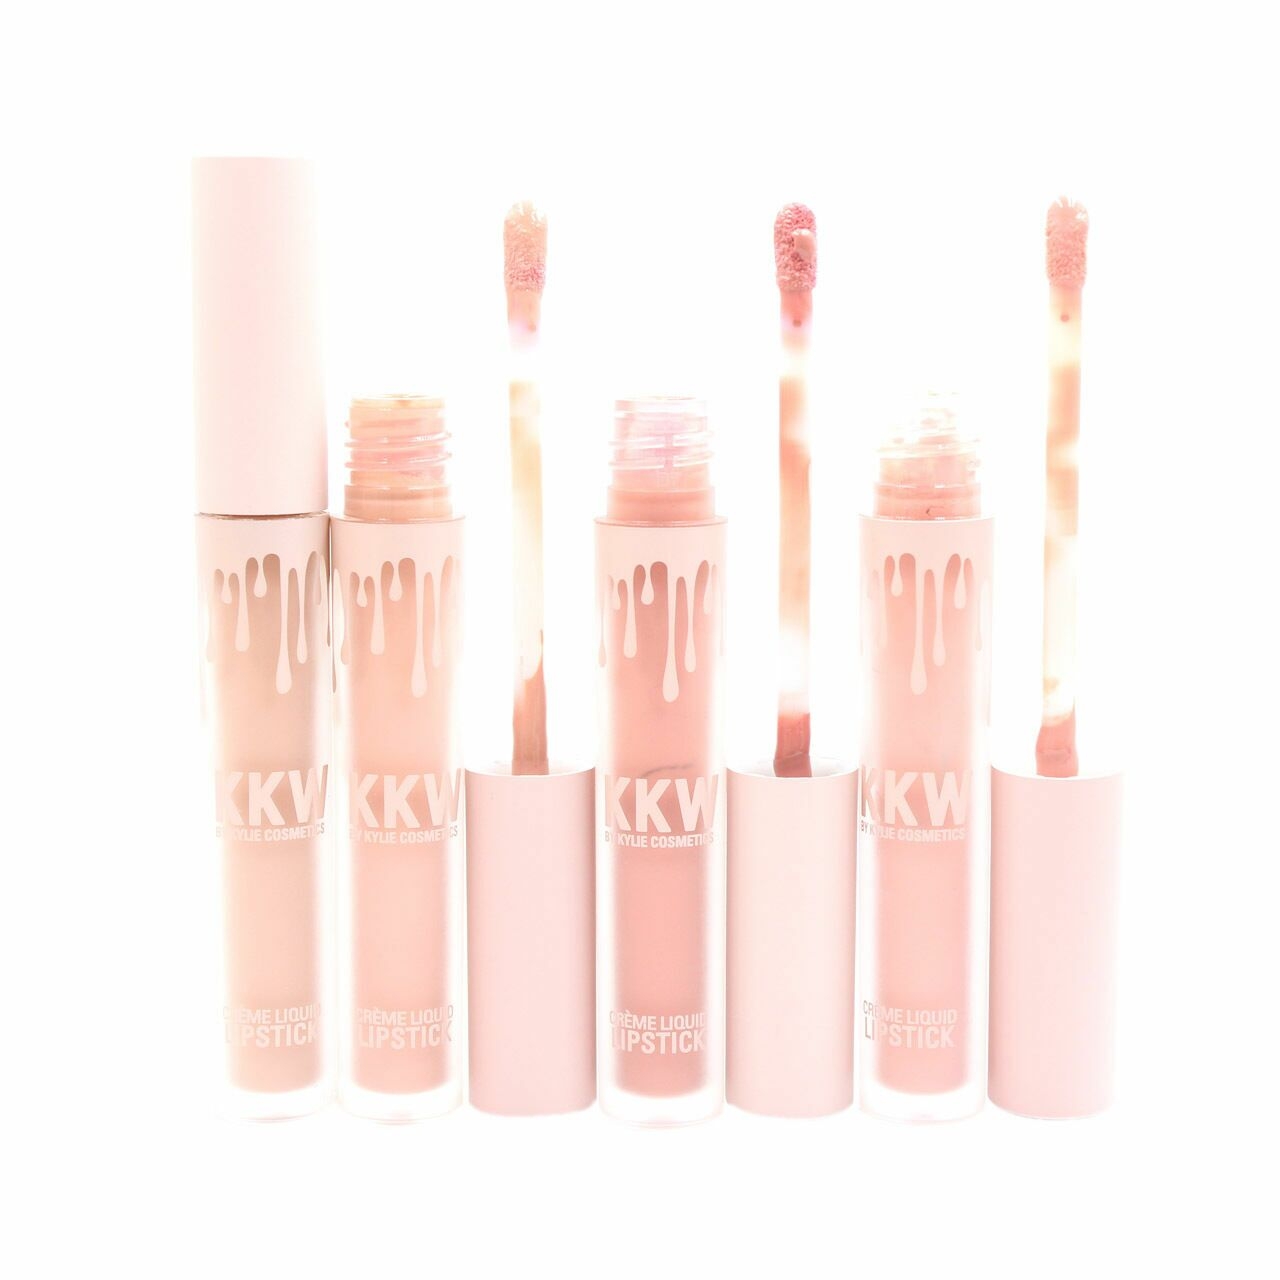 KKW By Kylie Cosmetics Creme Liquid Lipstick Sets and Palette